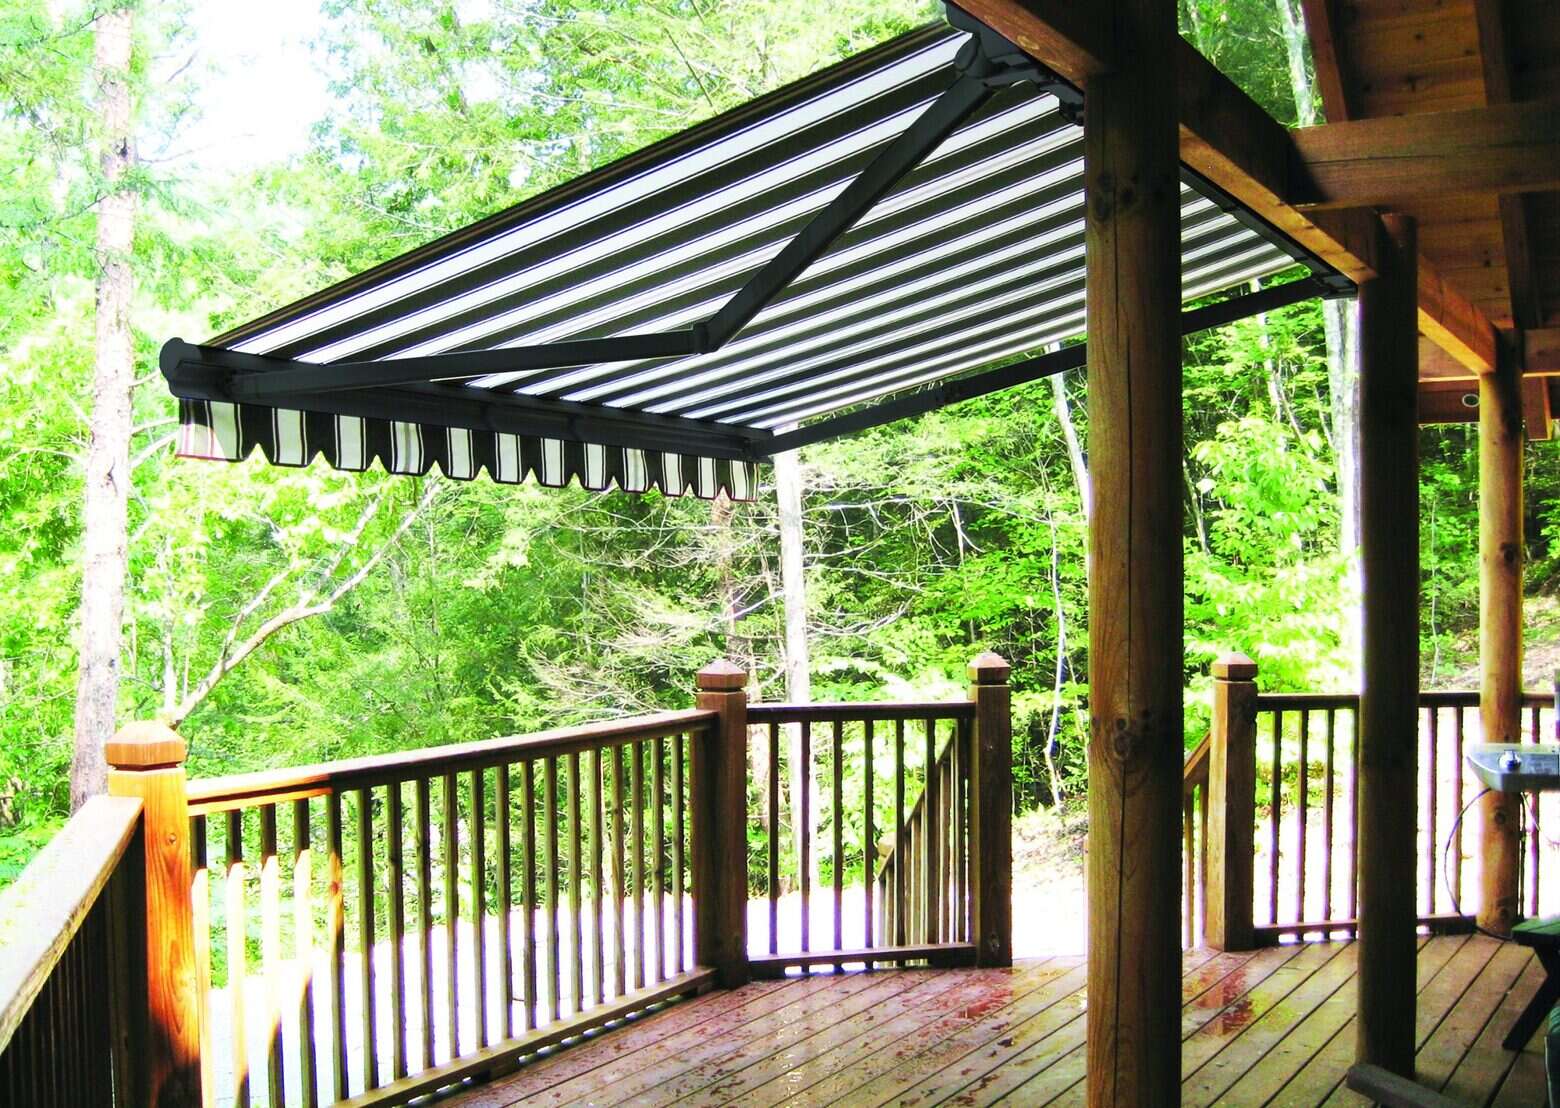 How Much Is An Awning For A Deck